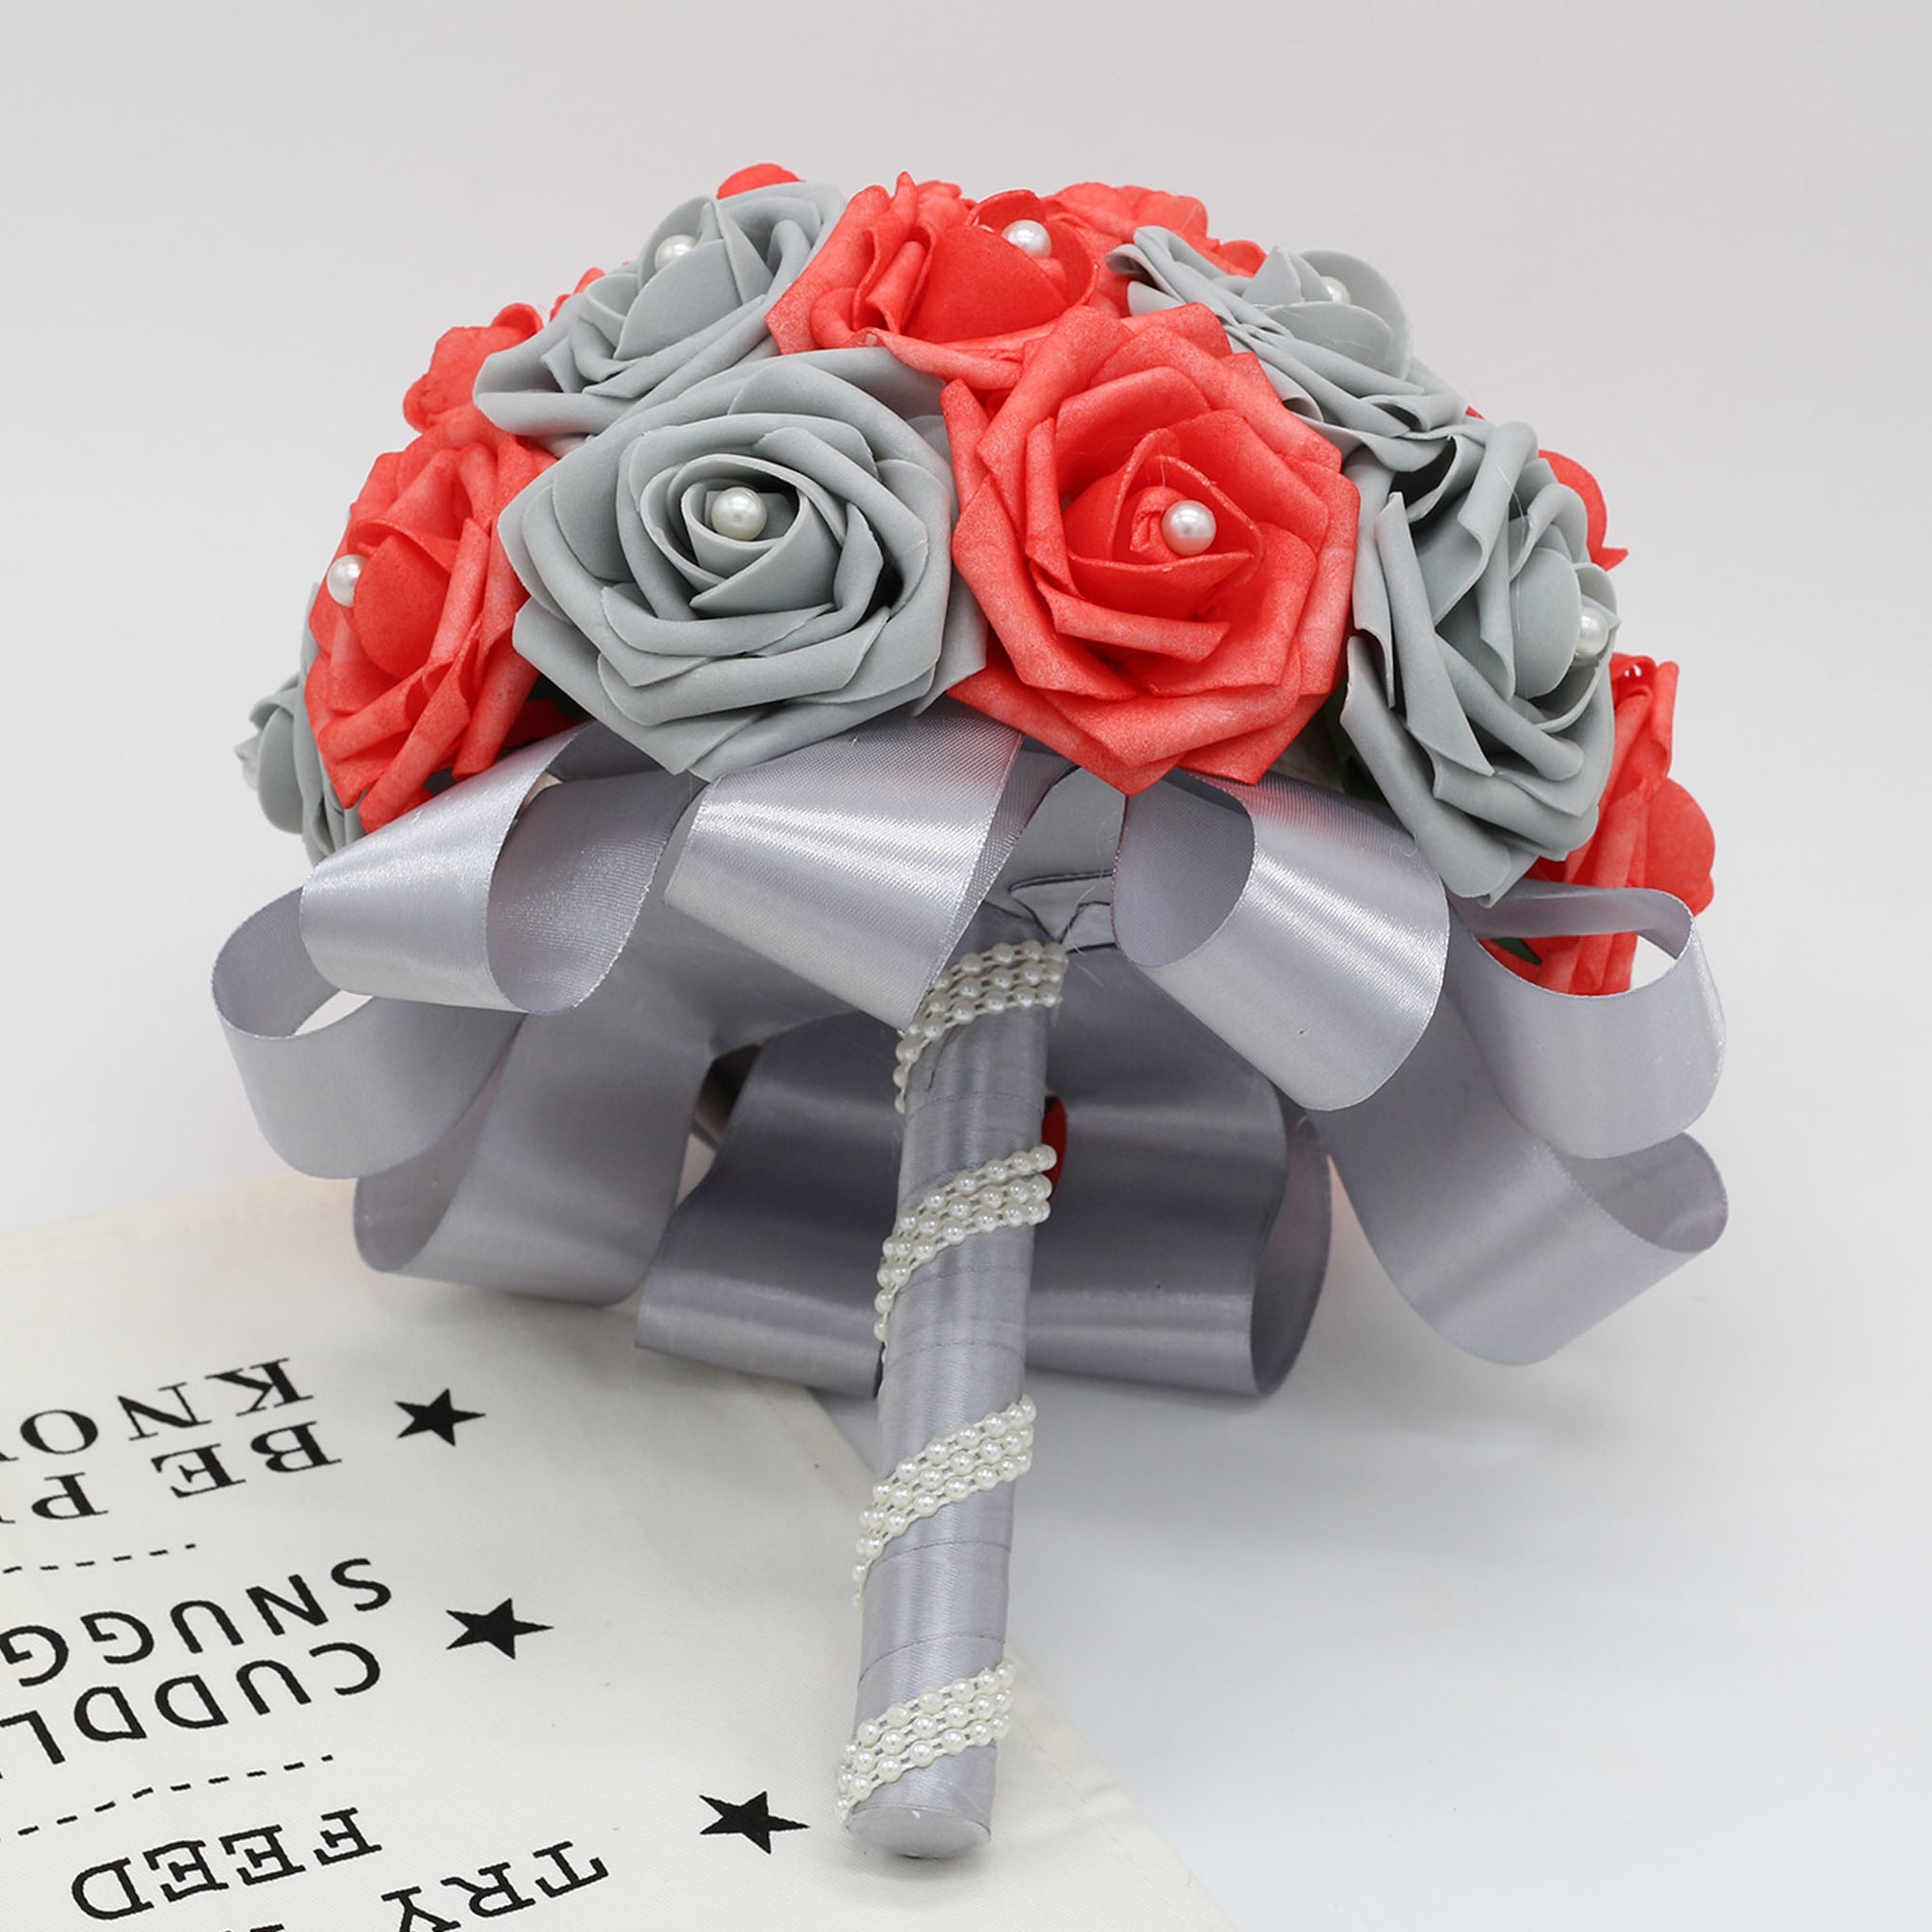 Coral Gray Bridal Bouquet Fake Flowers For Wedding Anniversary Bouquet